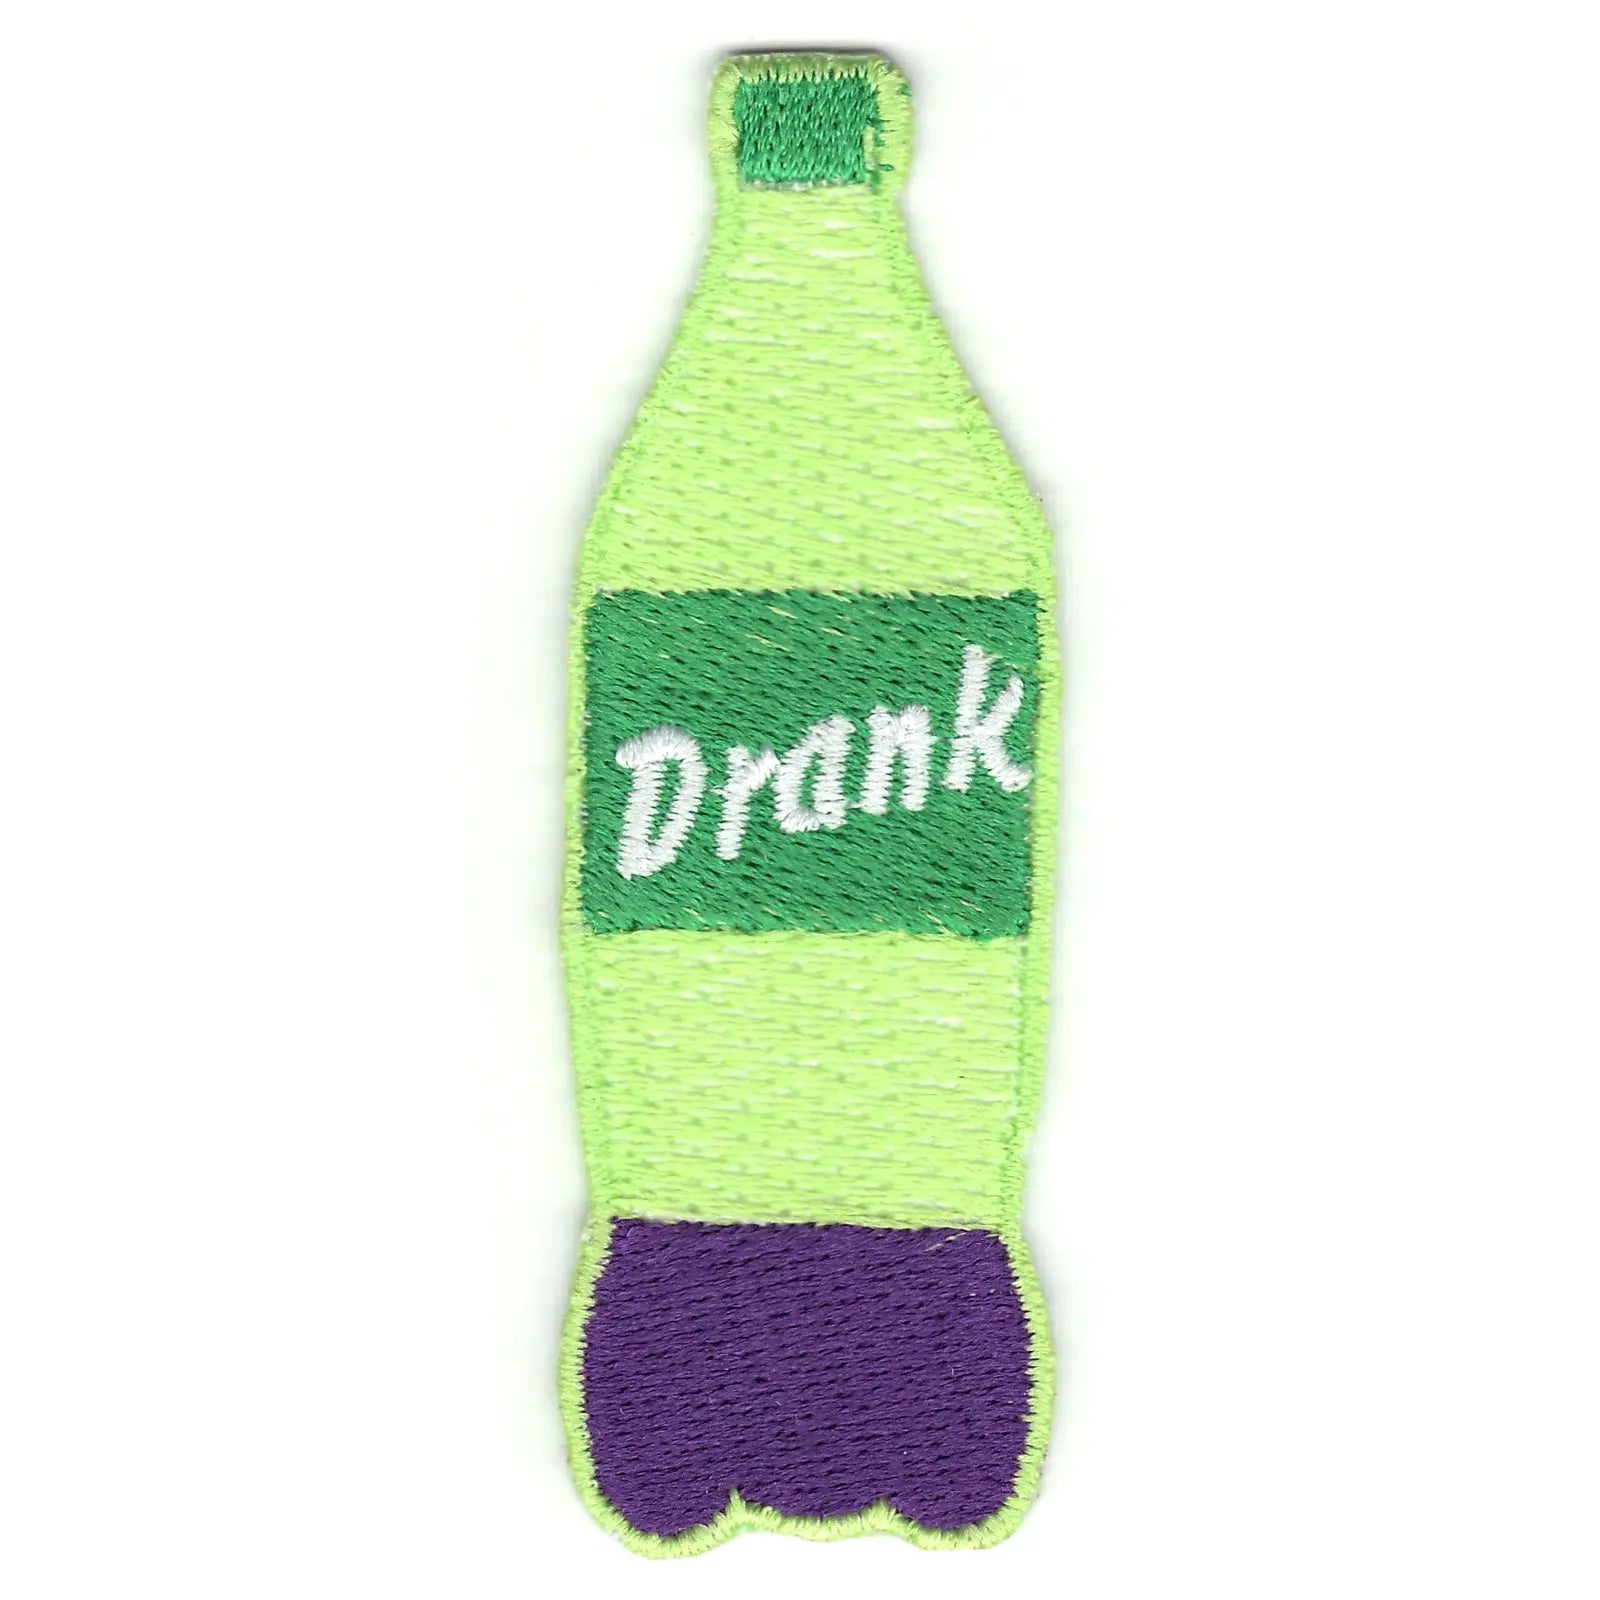 Dirty Soda With Purple Drank Iron On Applique Patch 